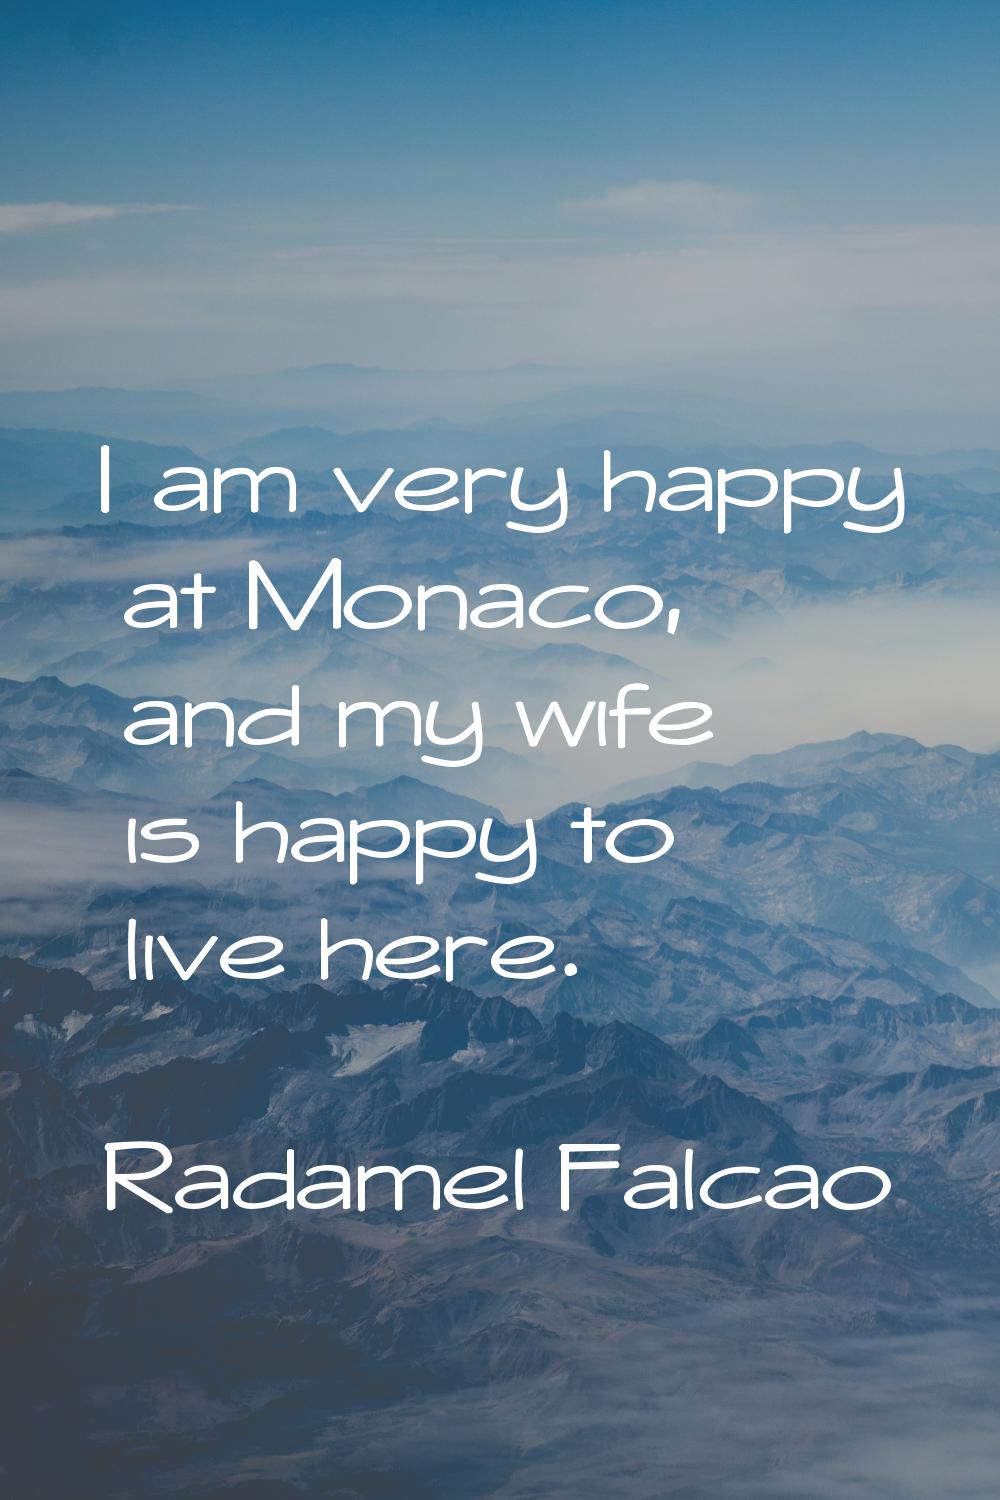 I am very happy at Monaco, and my wife is happy to live here.